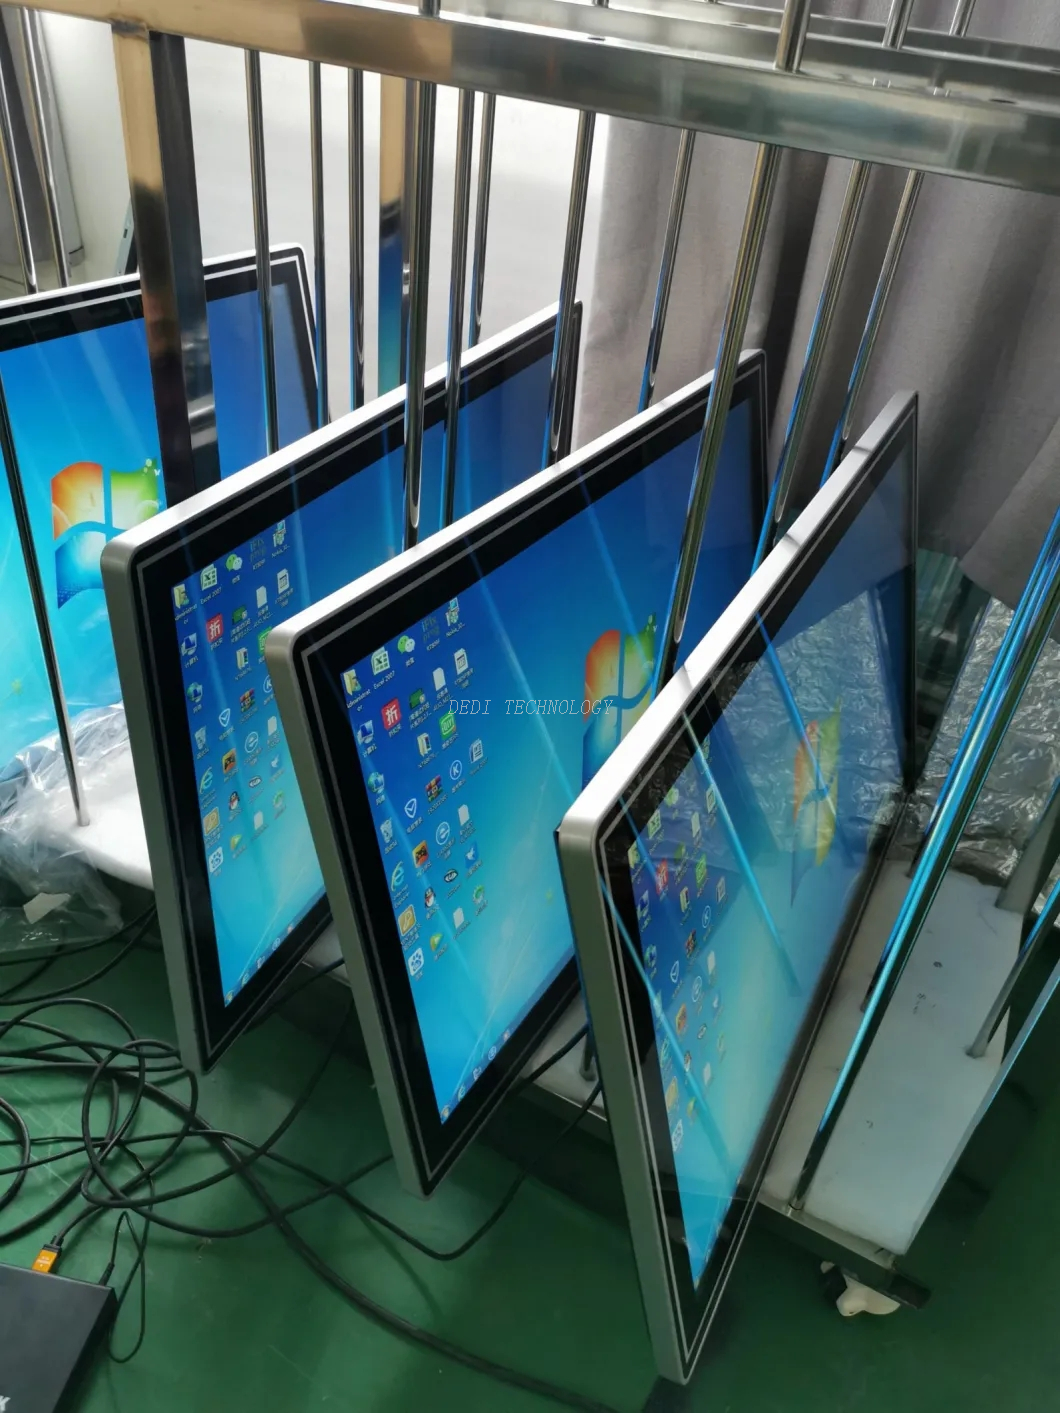 43-Wall-Mount-Touch-Screen-Monitor.webp (4)